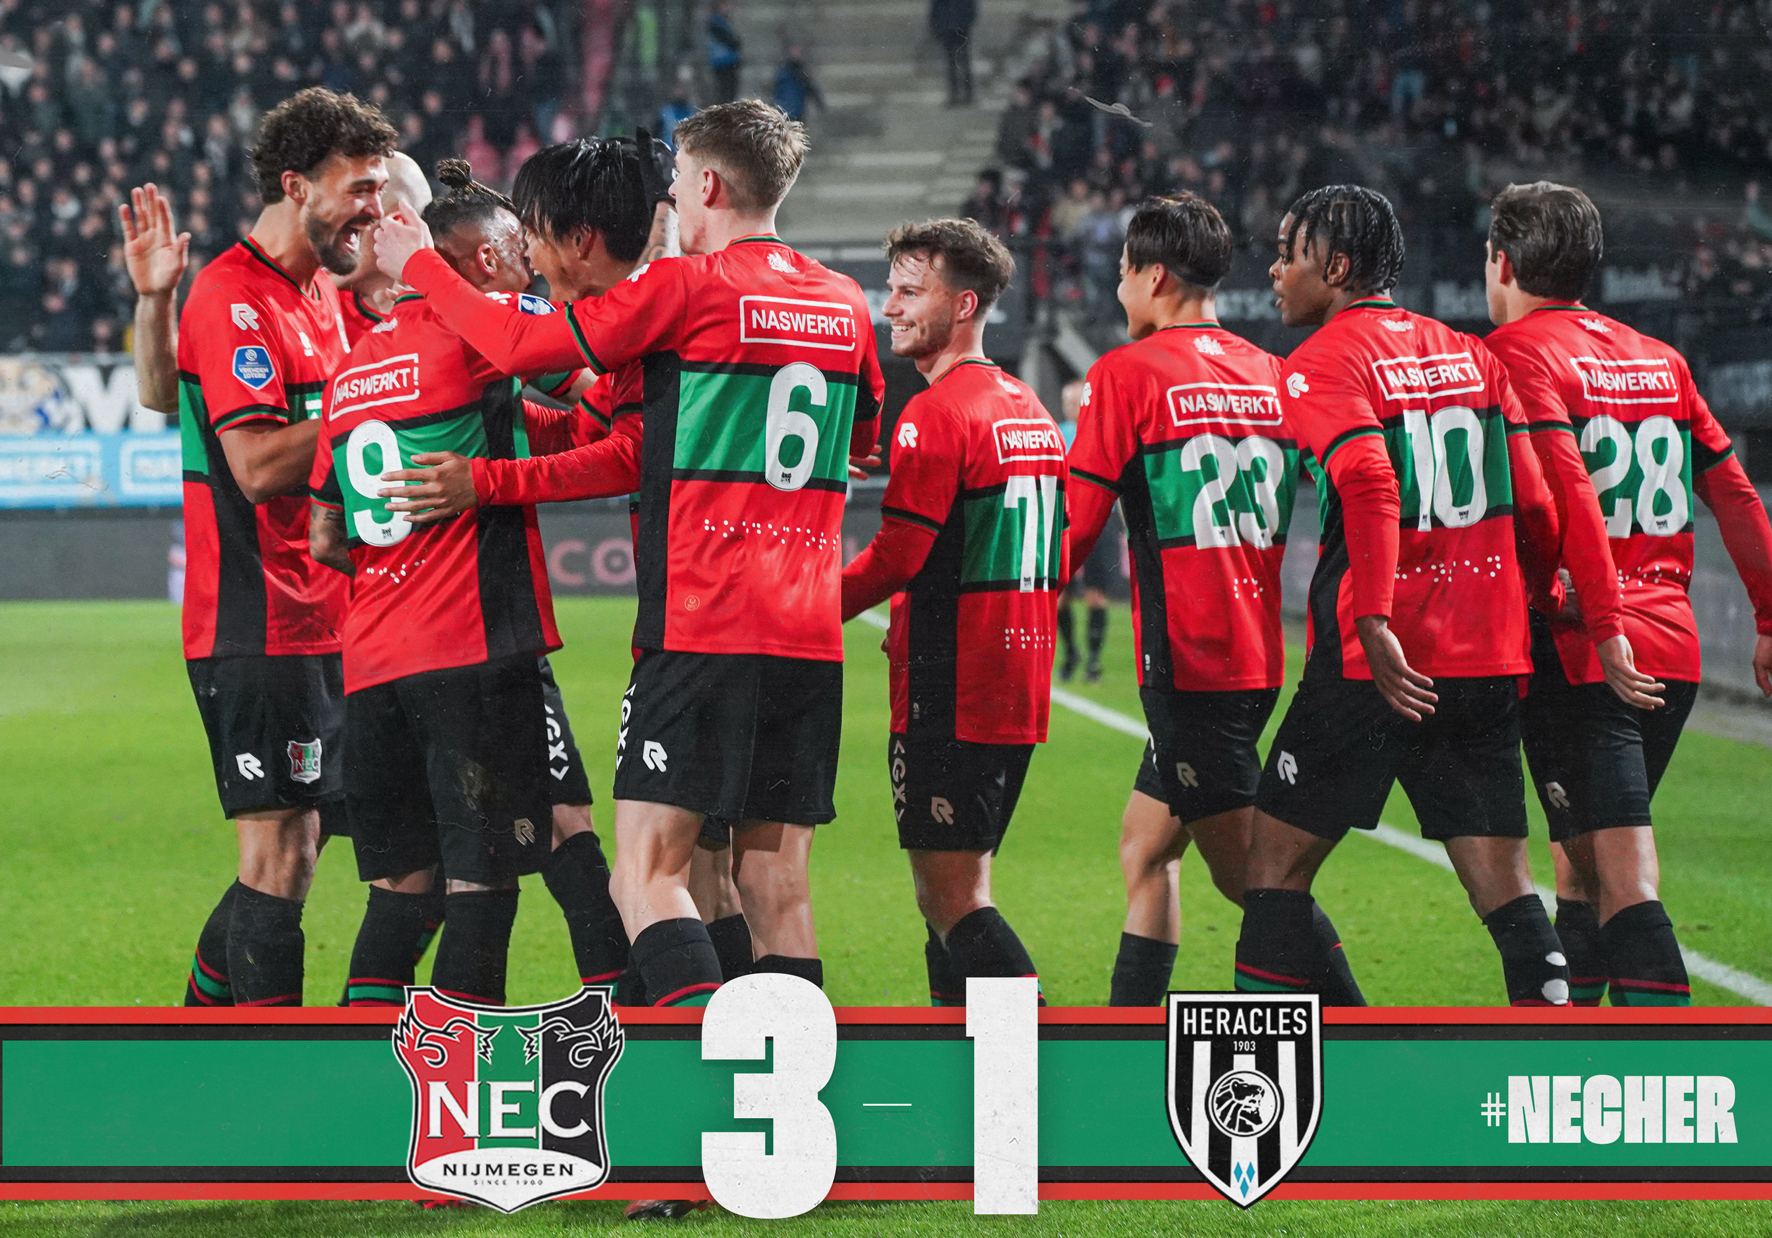 N.E.C. overtuigend langs Heracles Almelo